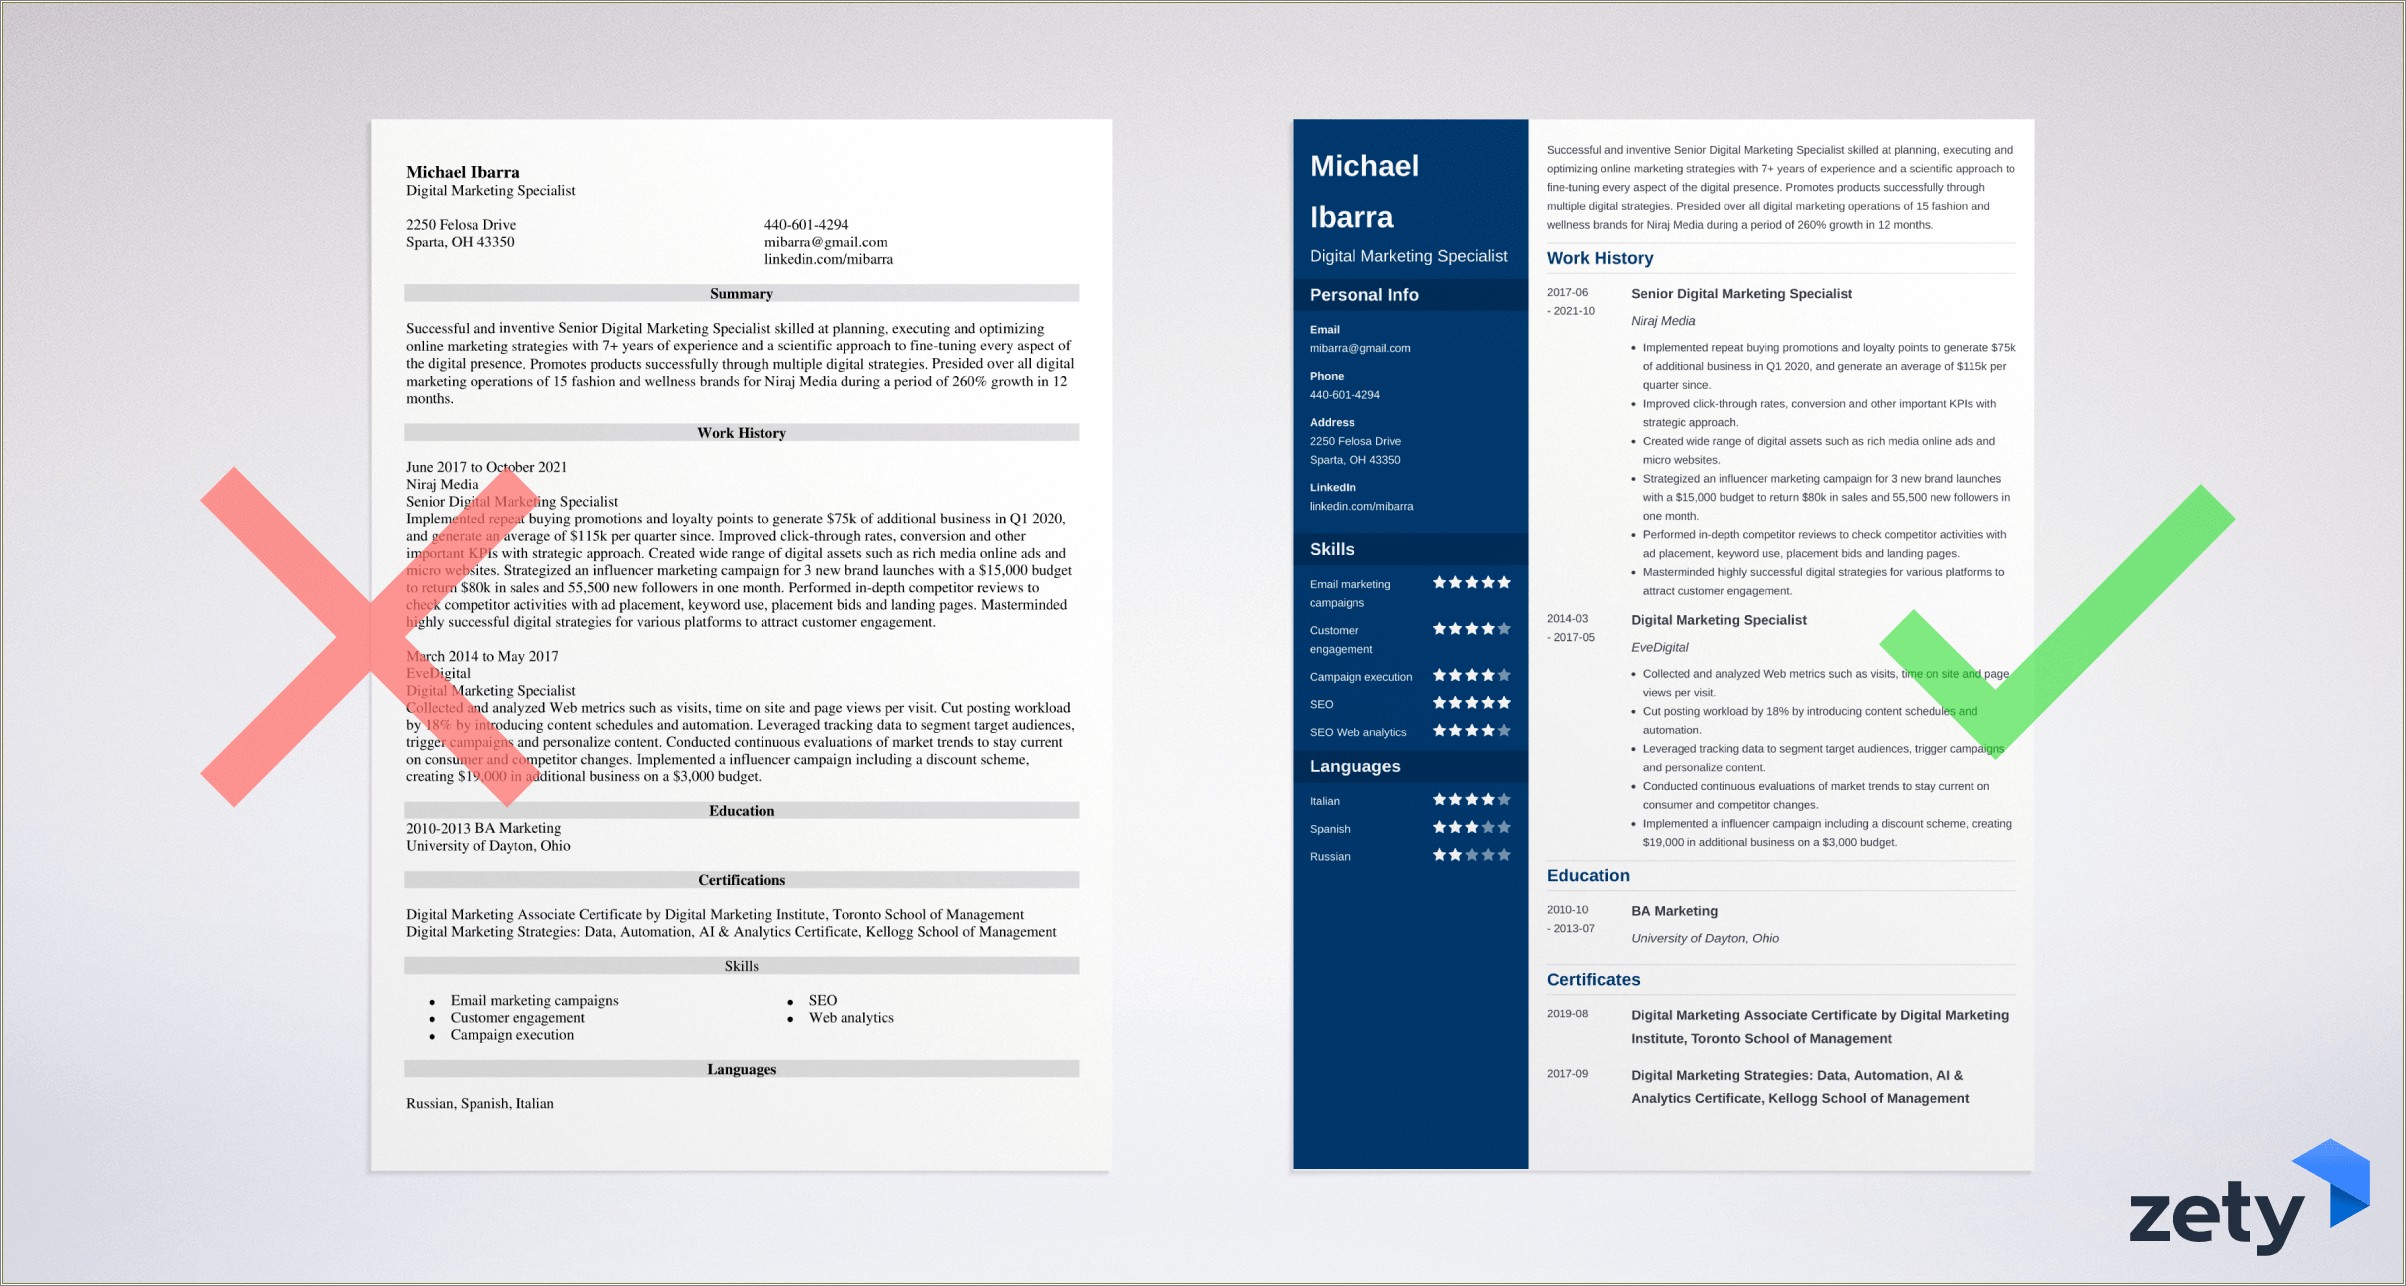 Resume Examples With Licenses And Other Experiences